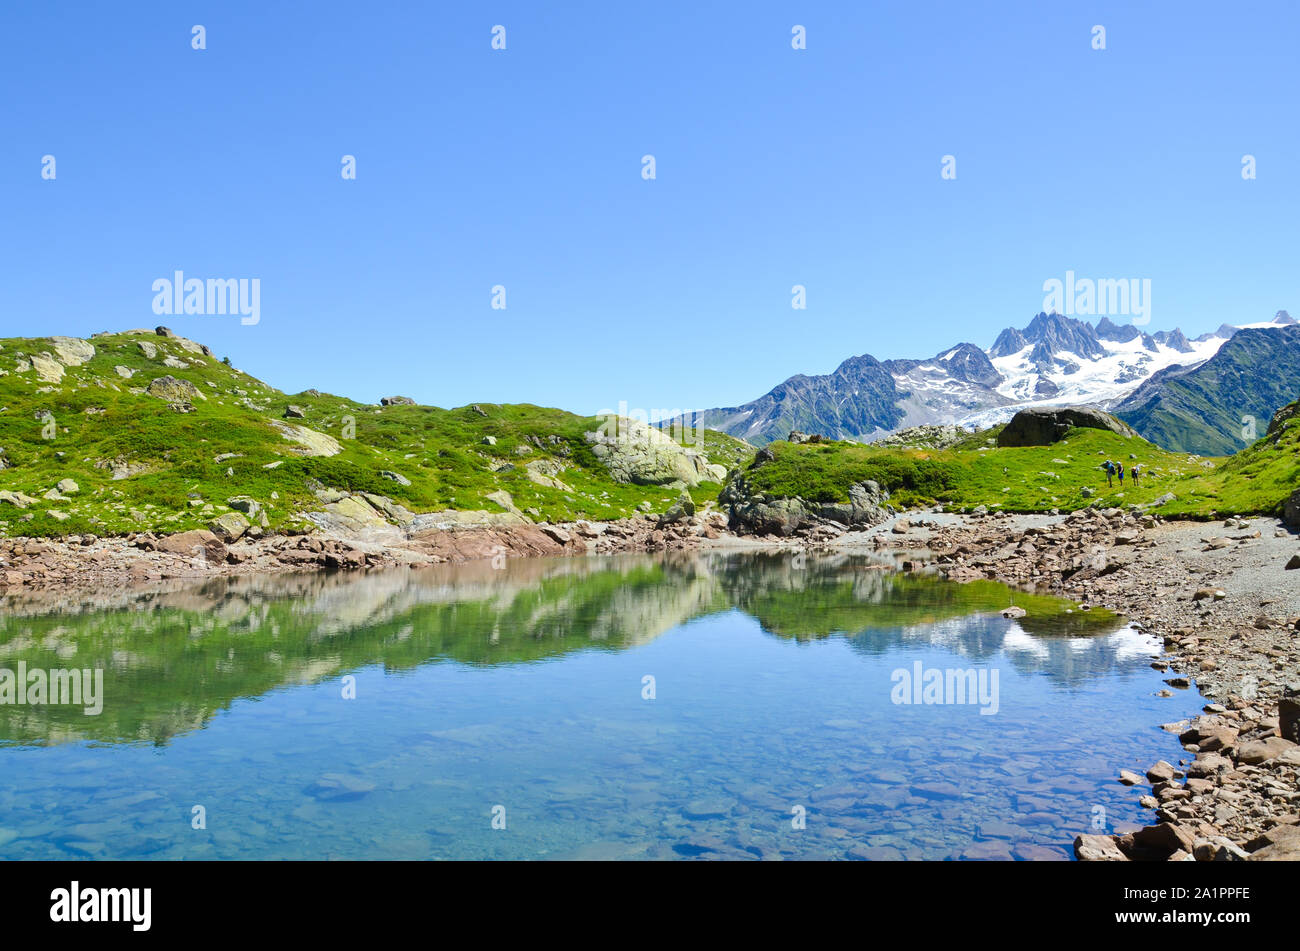 Beautiful Lac de Cheserys, Lake Cheserys near Chamonix-Mont-Blanc in French Alps. Alpine lake with snow capped mountains in background. France mountain, Tour du Mont Blanc. Amazing landscapes. Stock Photo